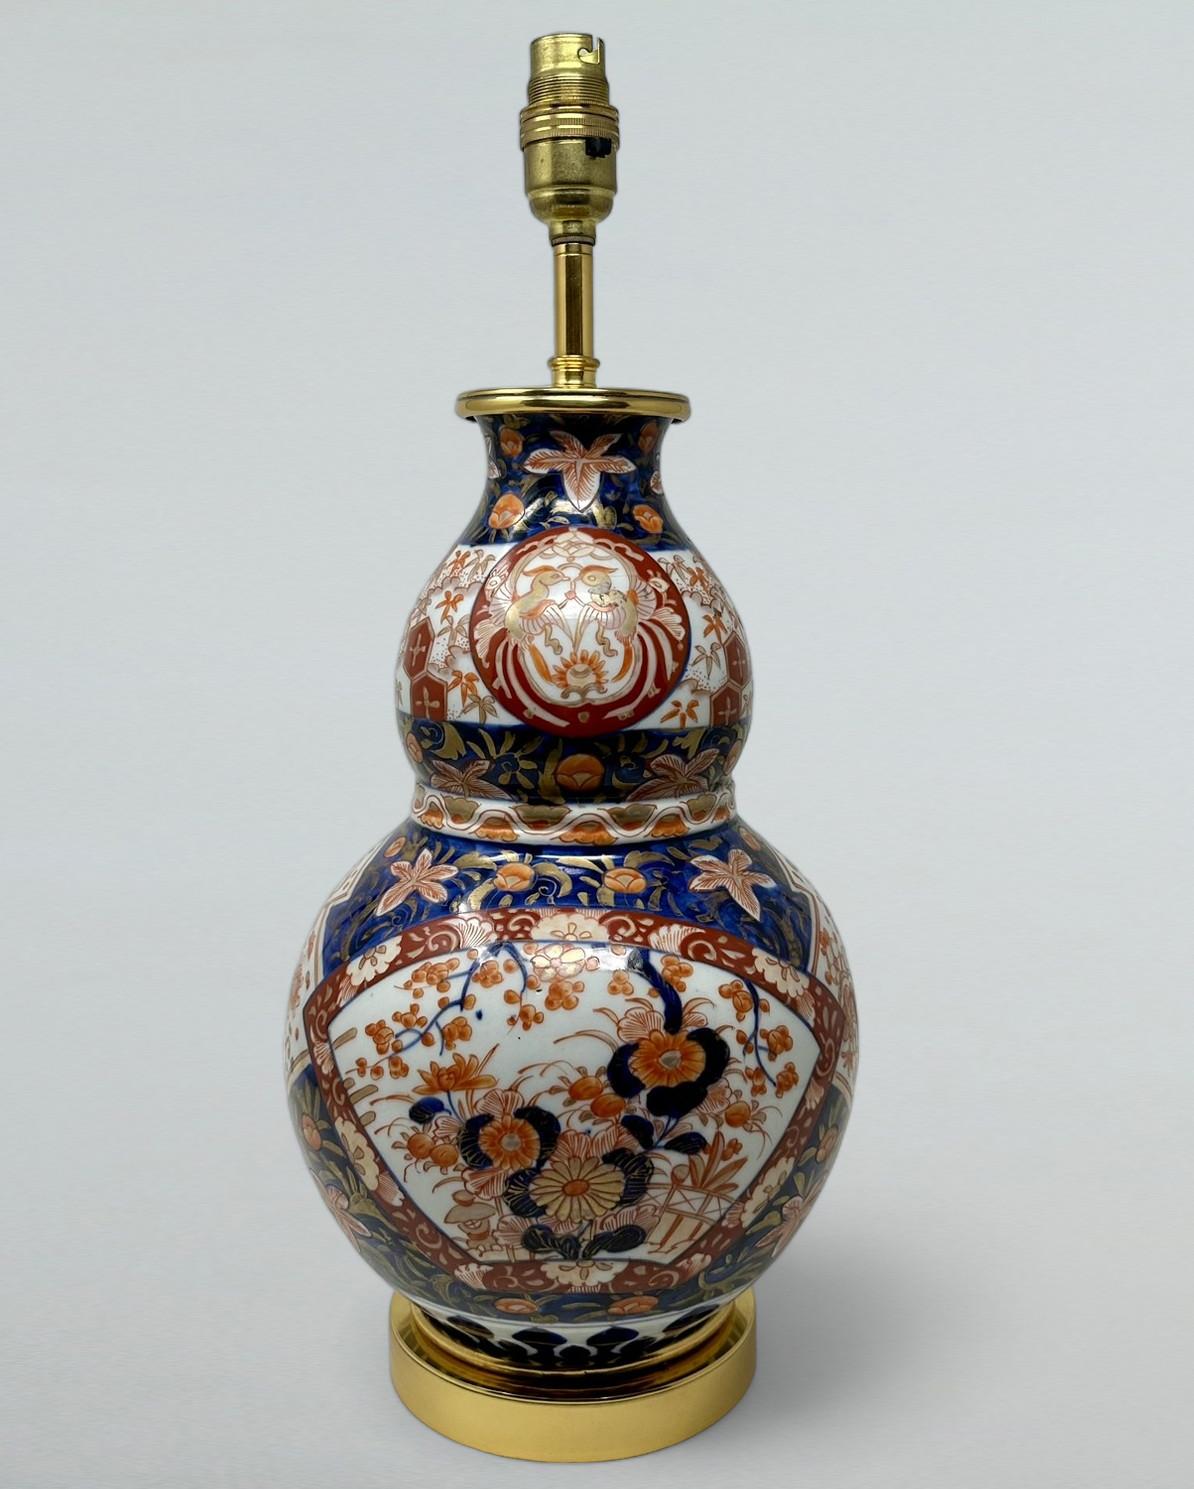 Stunning Traditional Japanese Imari hand decorated Porcelain Vase of seldom seen double gourd form glazed porcelain, of generous proportions, now converted to an Electric Table Lamp, complete with later plain heavy-duty Ormolu circular stepped base.